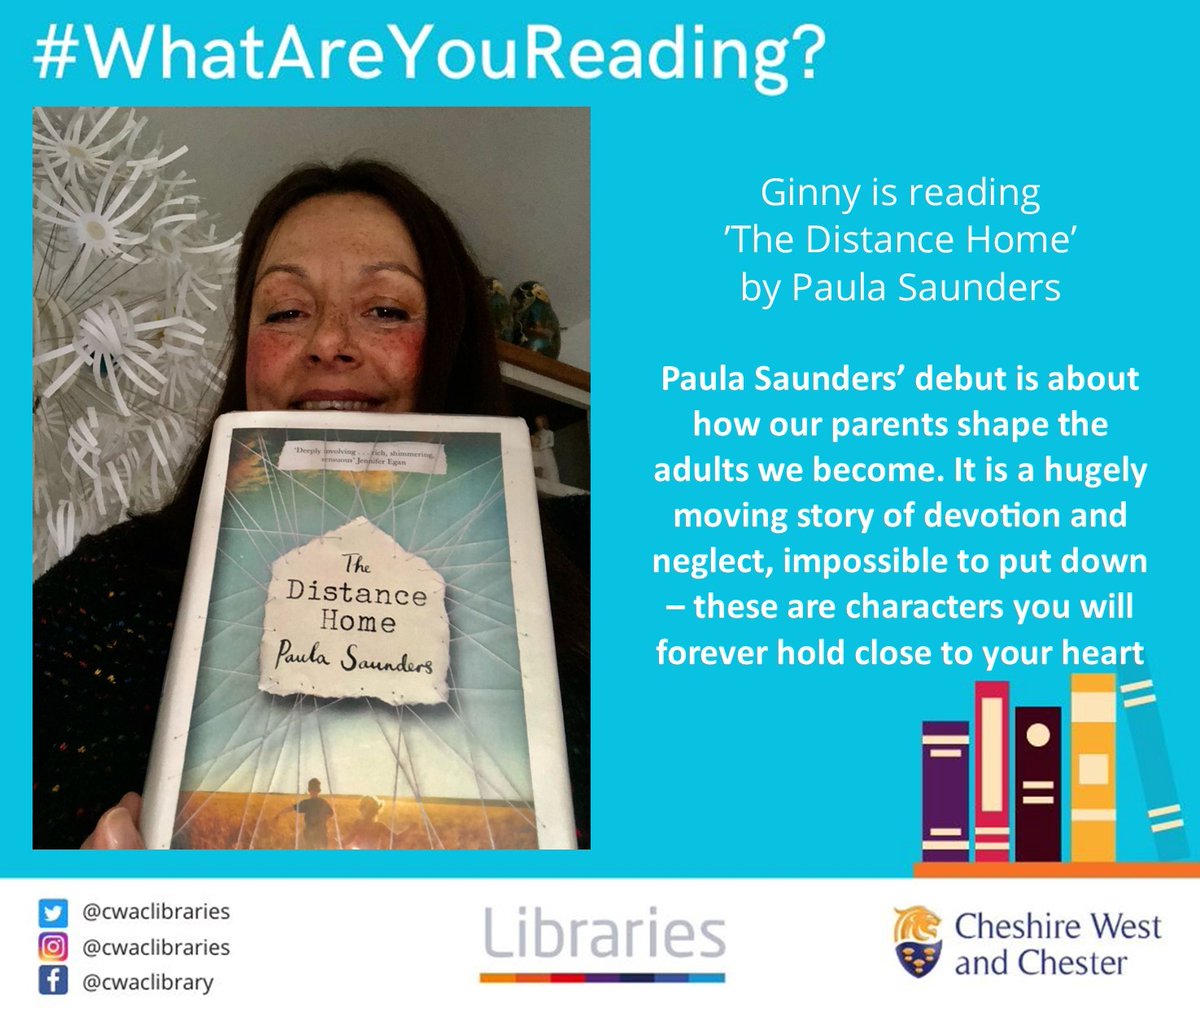 #WhatAreYouReading? Ginny is reading 'The Distance Home' by Paula Saunders The story of two children growing up side by side – the one given opportunities the other just misses – and the fall-out in their adult lives. Reserve your copy now: cwac.co/g7OP3